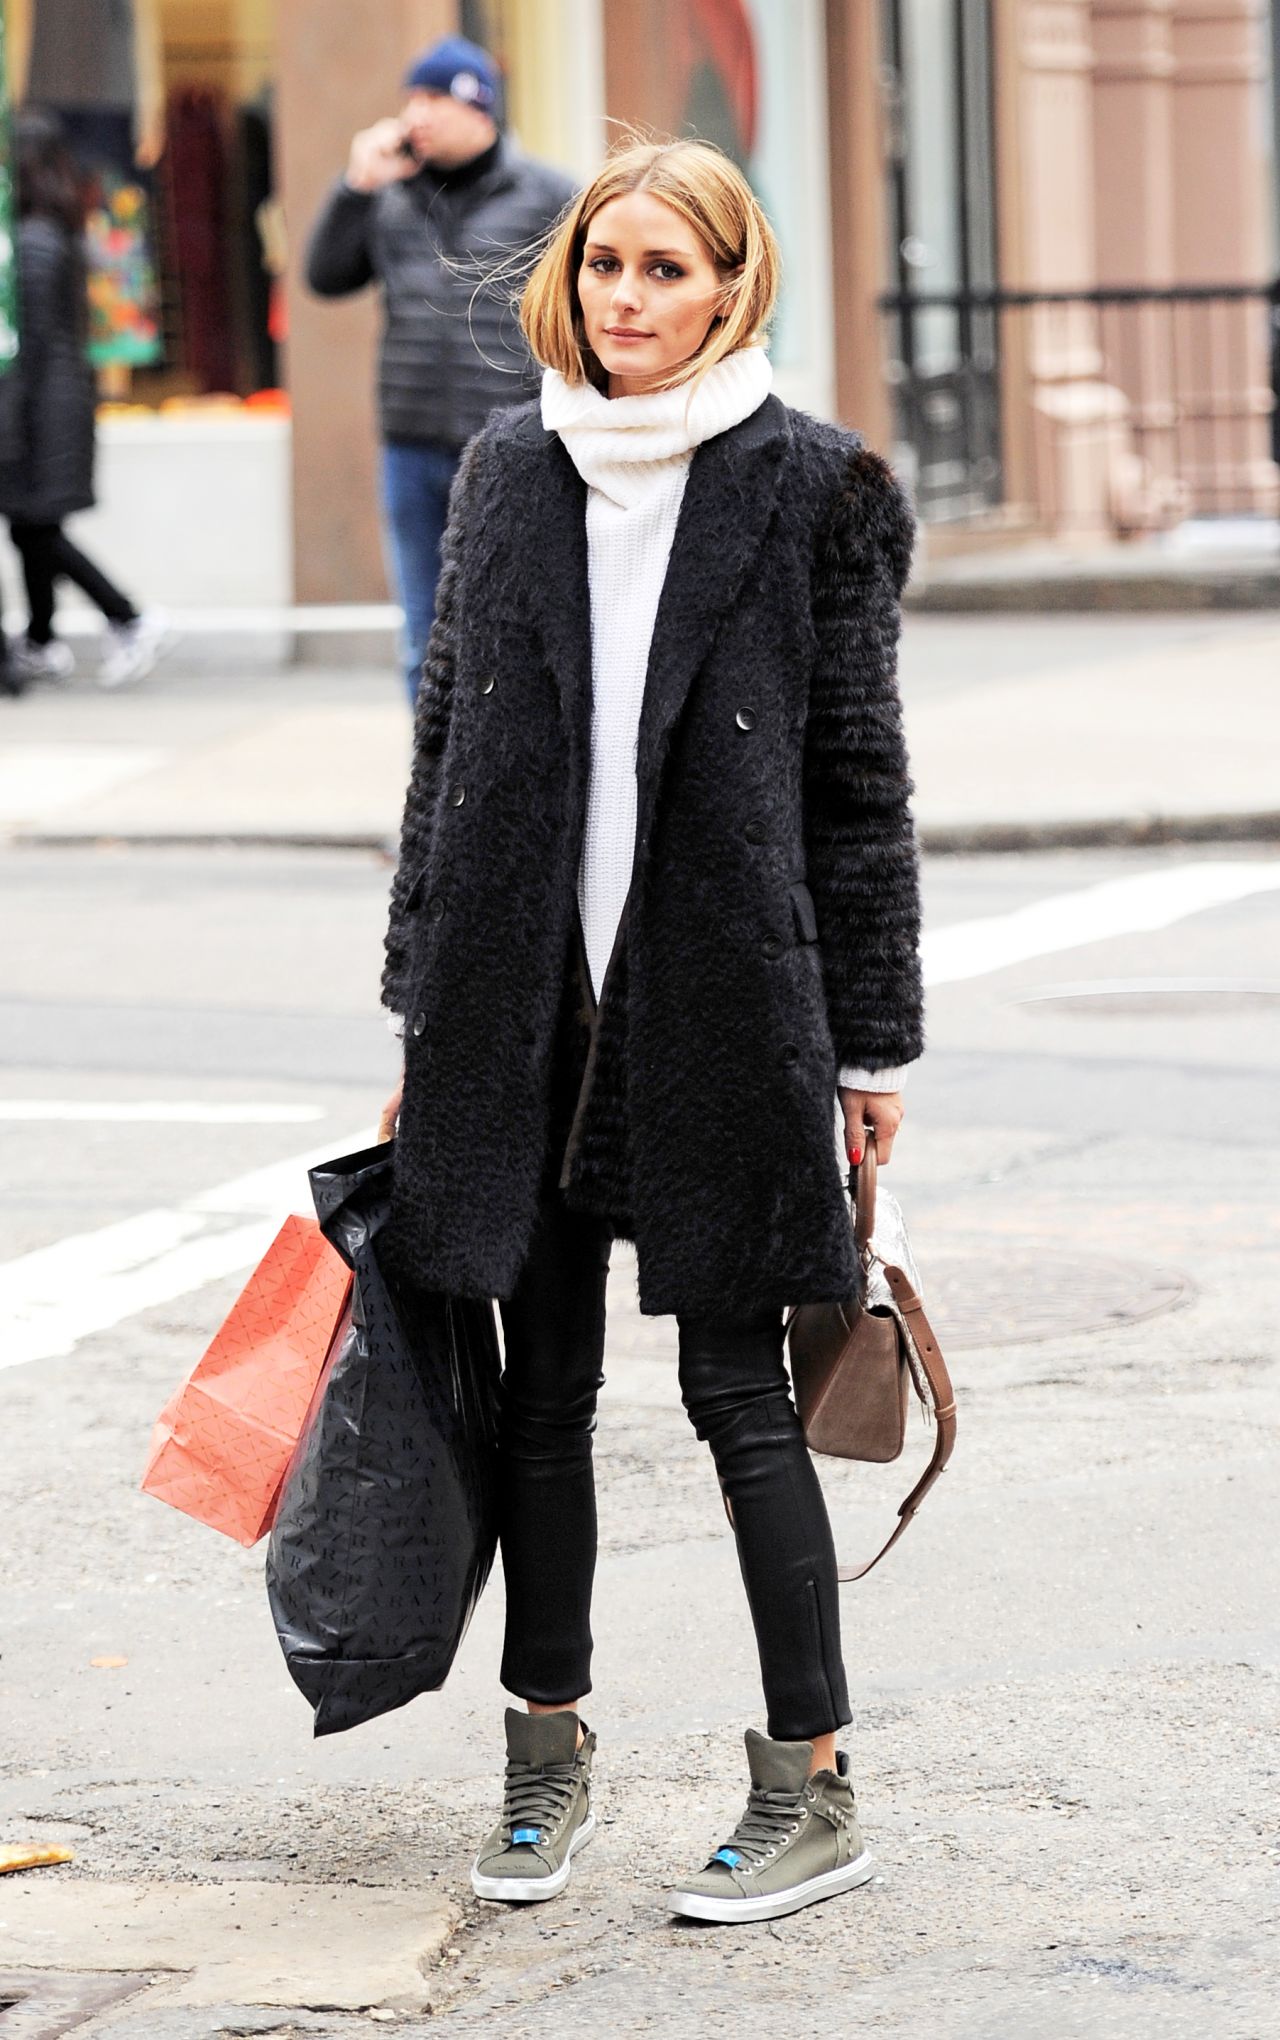 Steal her style: Olivia Palermo - Kate Waterhouse